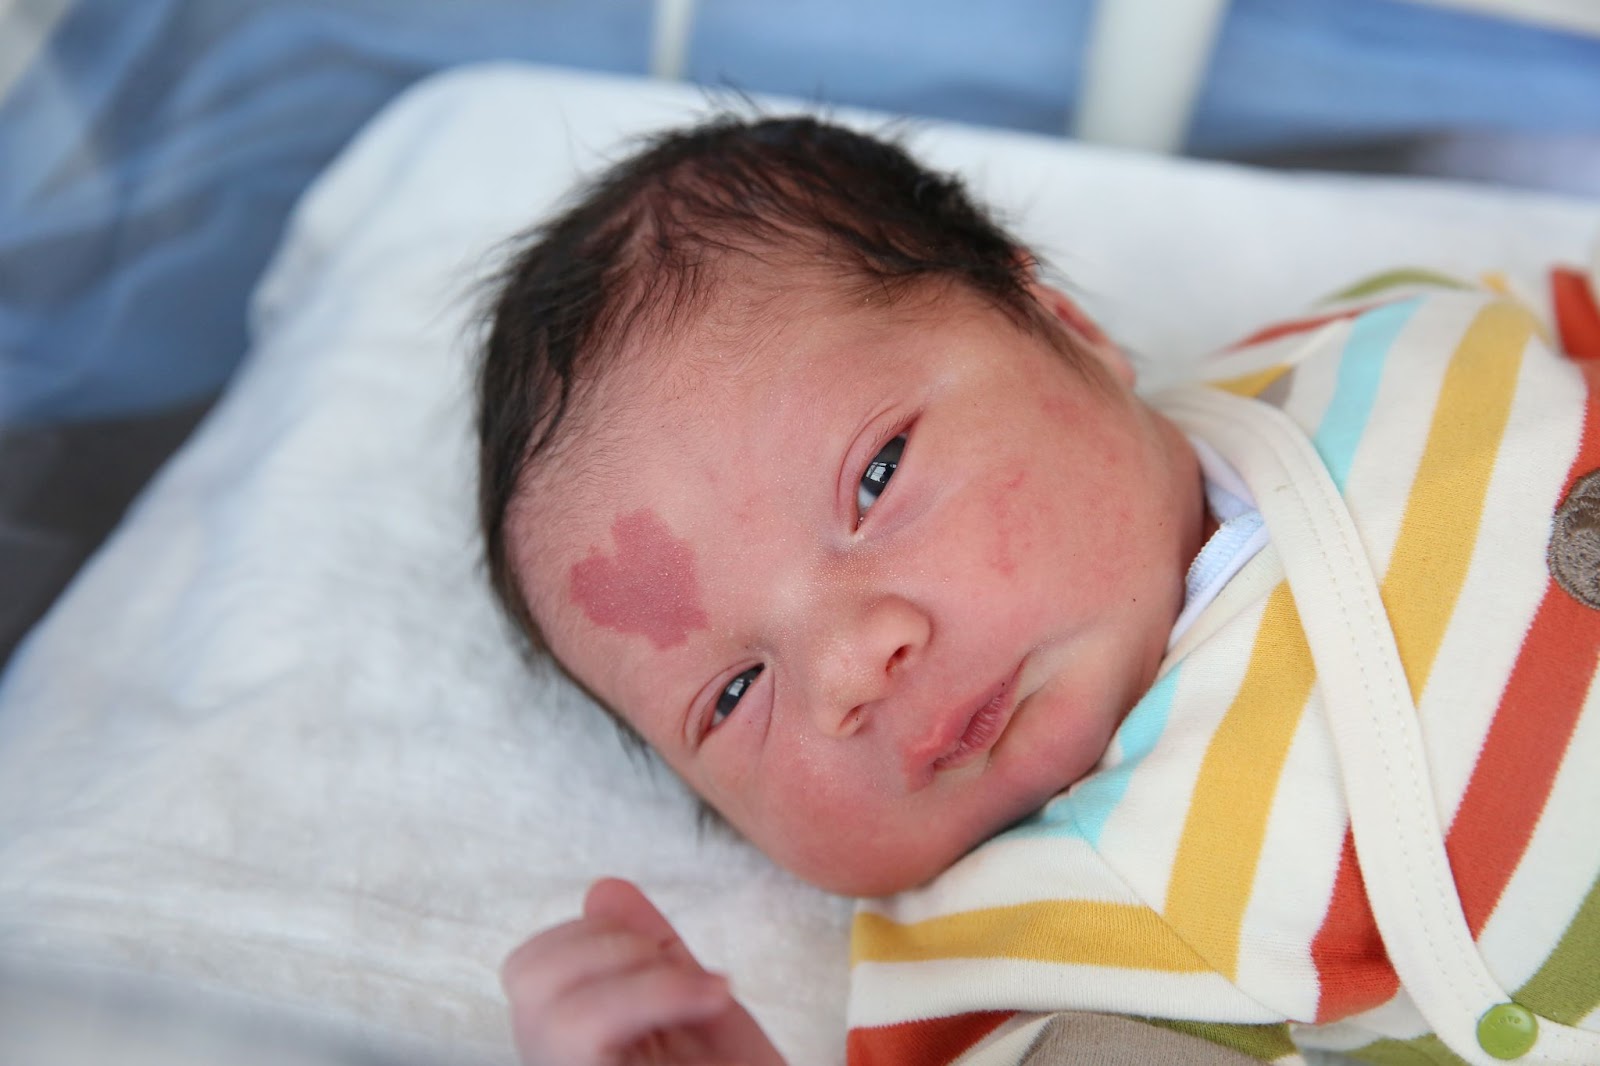 Çinar Engin, the"Love Baby" with the heart-shaped birthmark